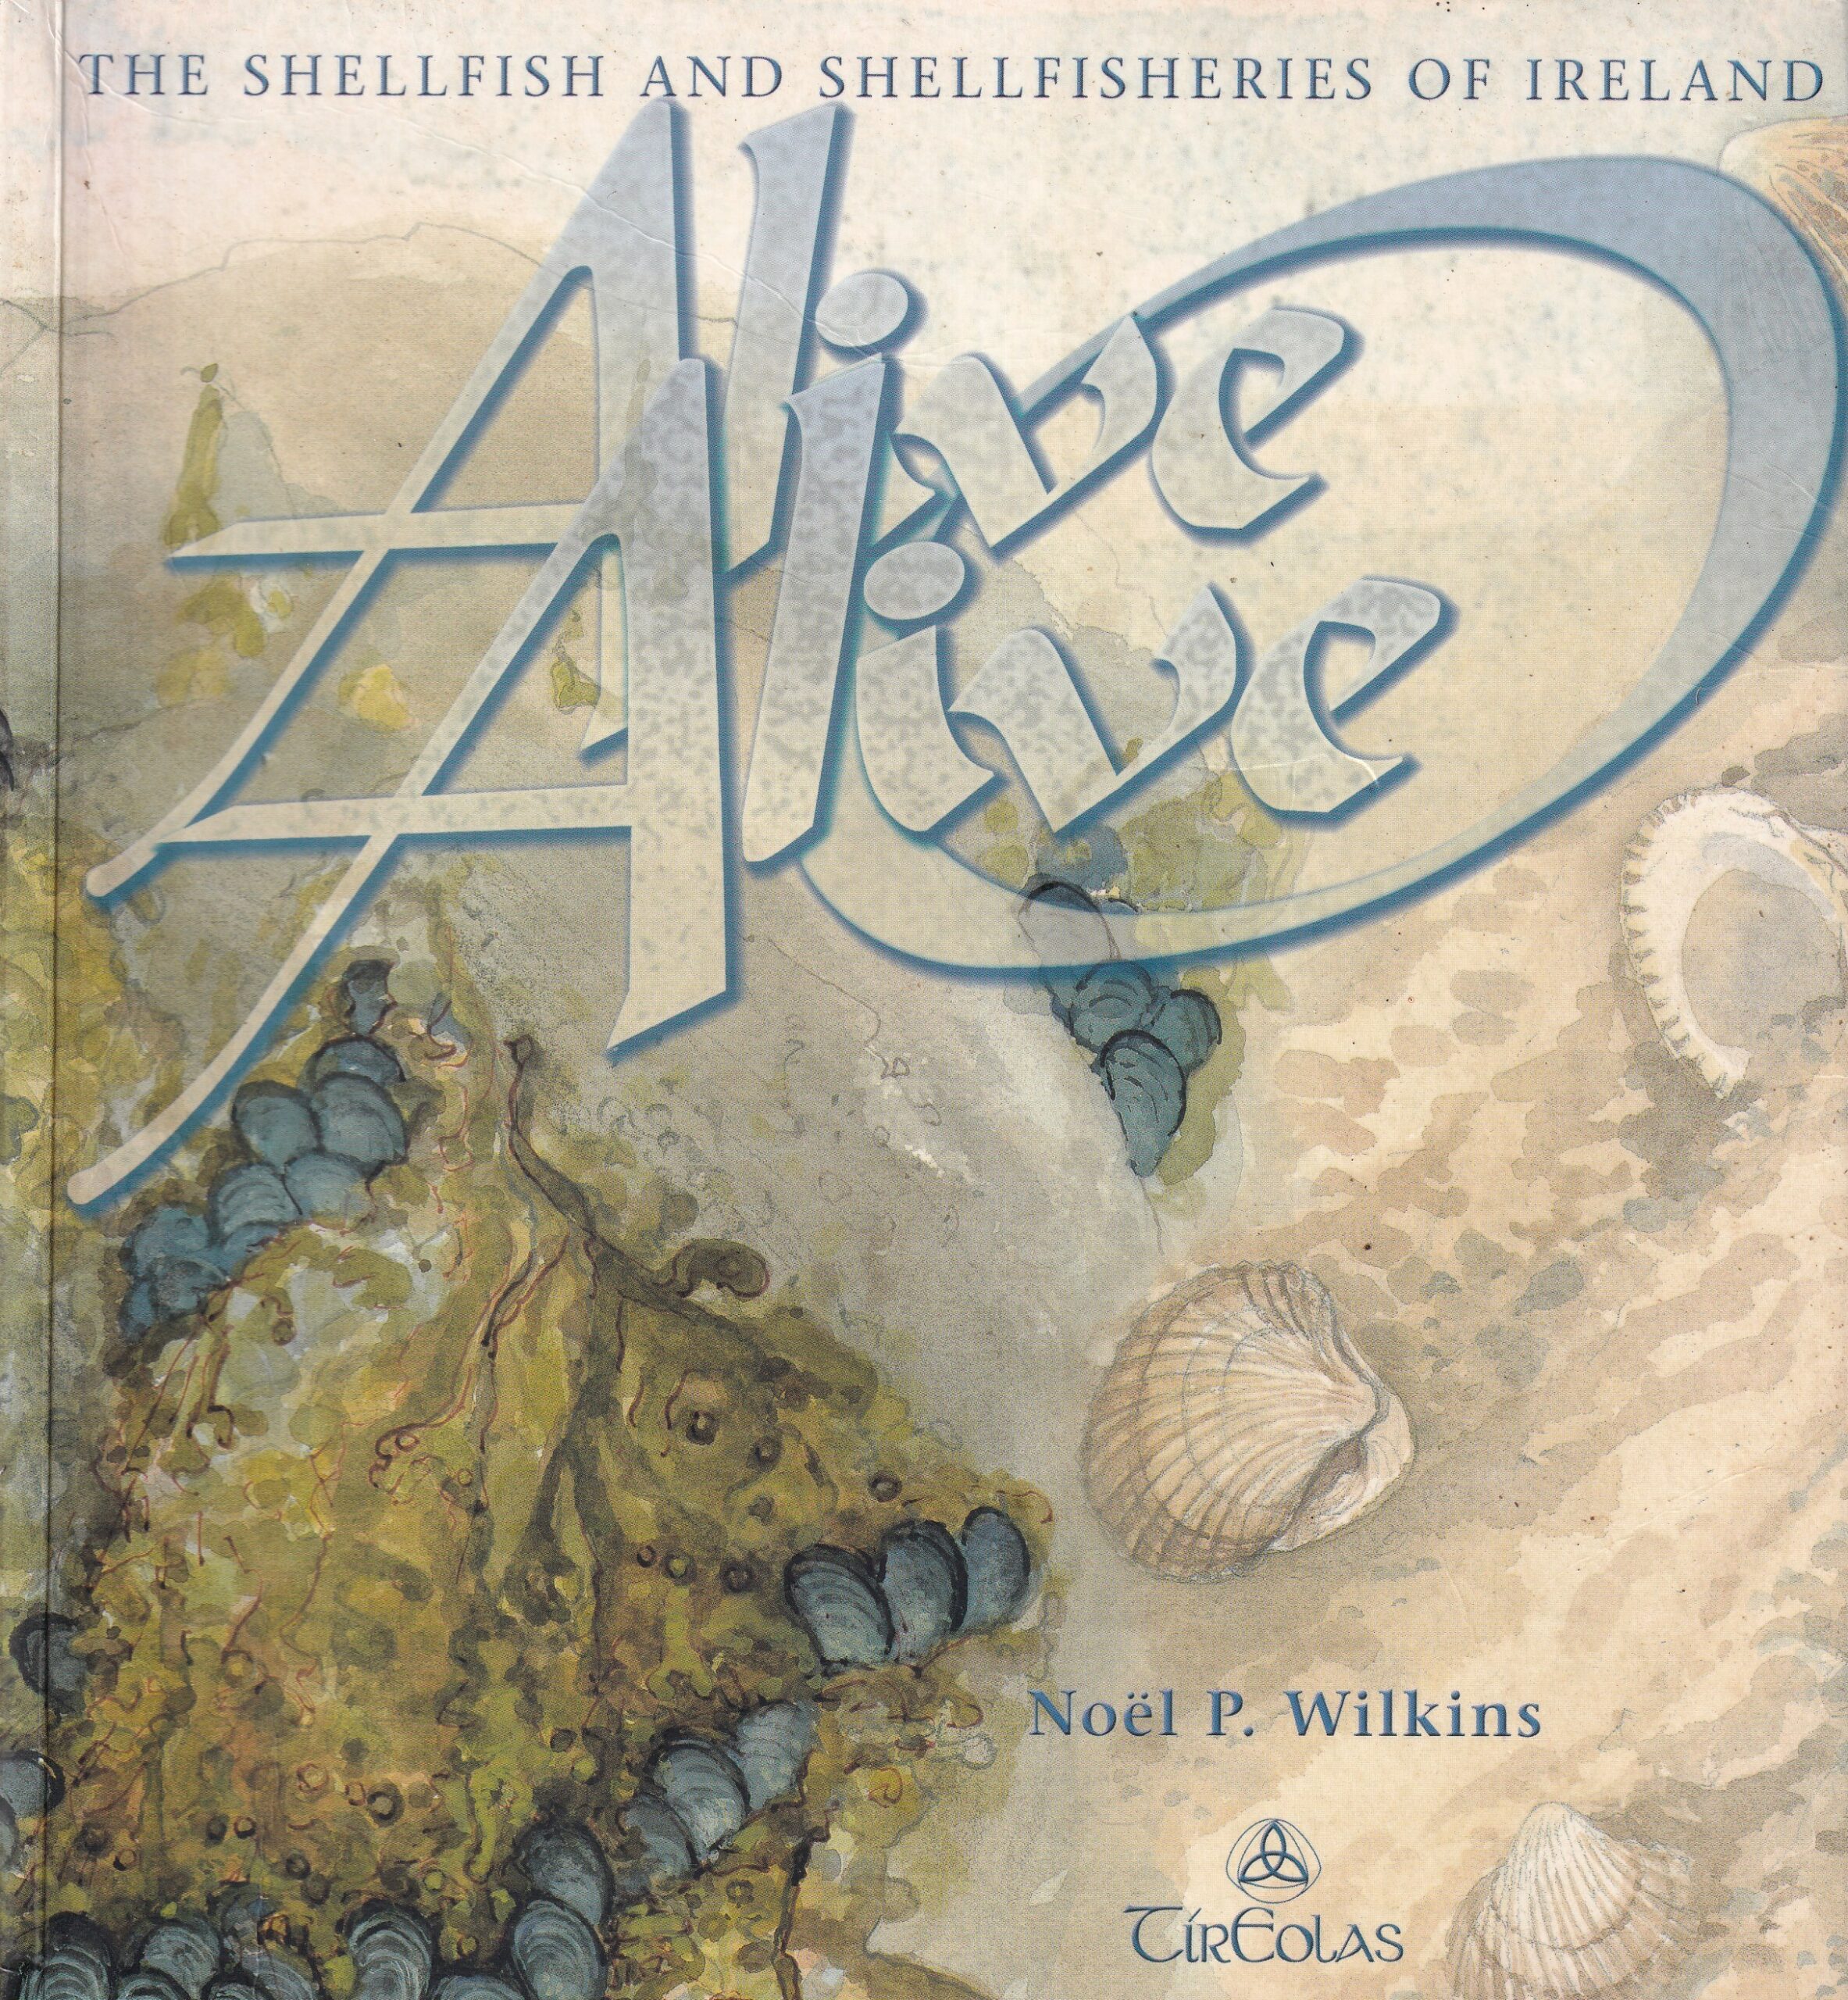 Alive Alive O: The Shellfish and Shellfisheries of Ireland | Noel P. Wilkins | Charlie Byrne's